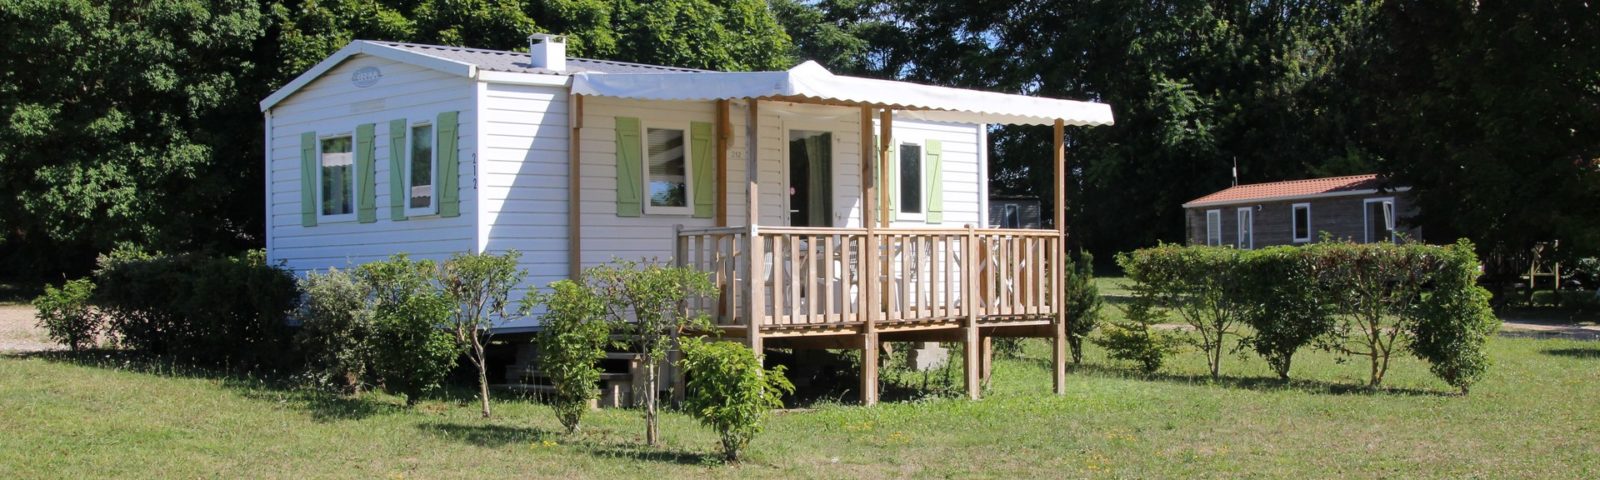 Holiday rentals: comfort mobile home 3 rooms, Poitiers, France